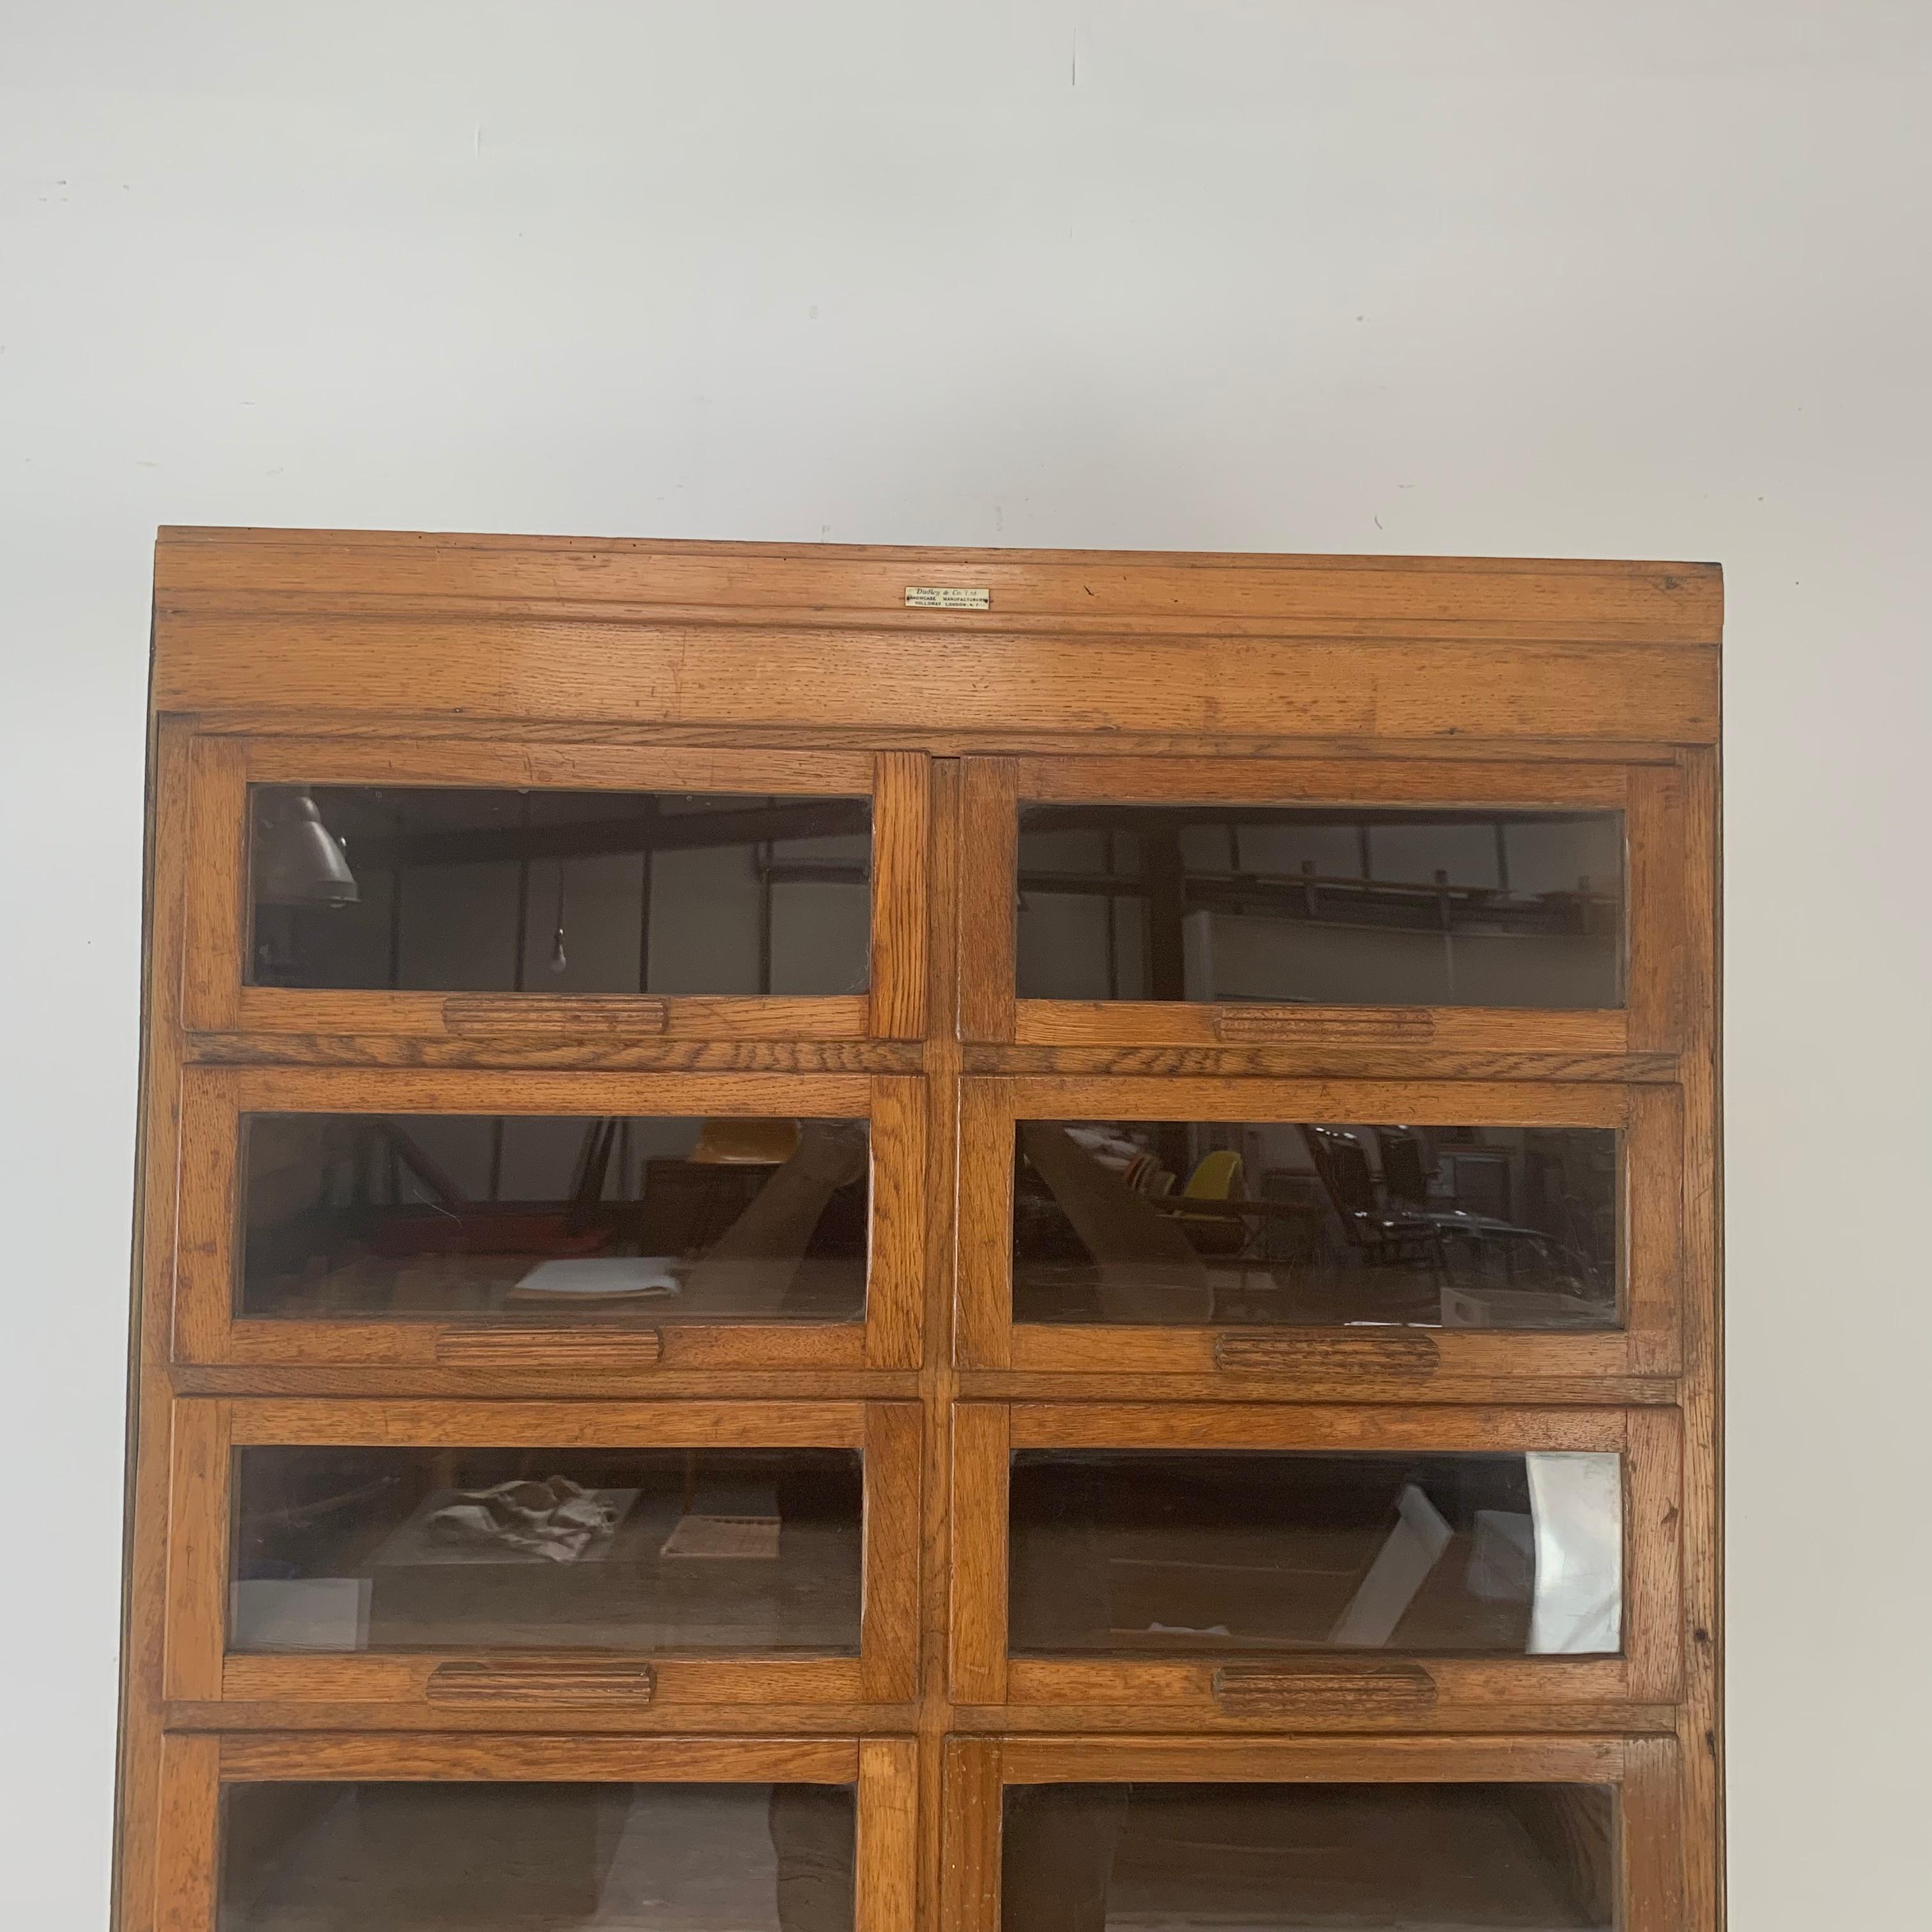 Wood Vintage 20-Drawer Haberdashery Cabinet Shop Display Made by Dudley & Co.